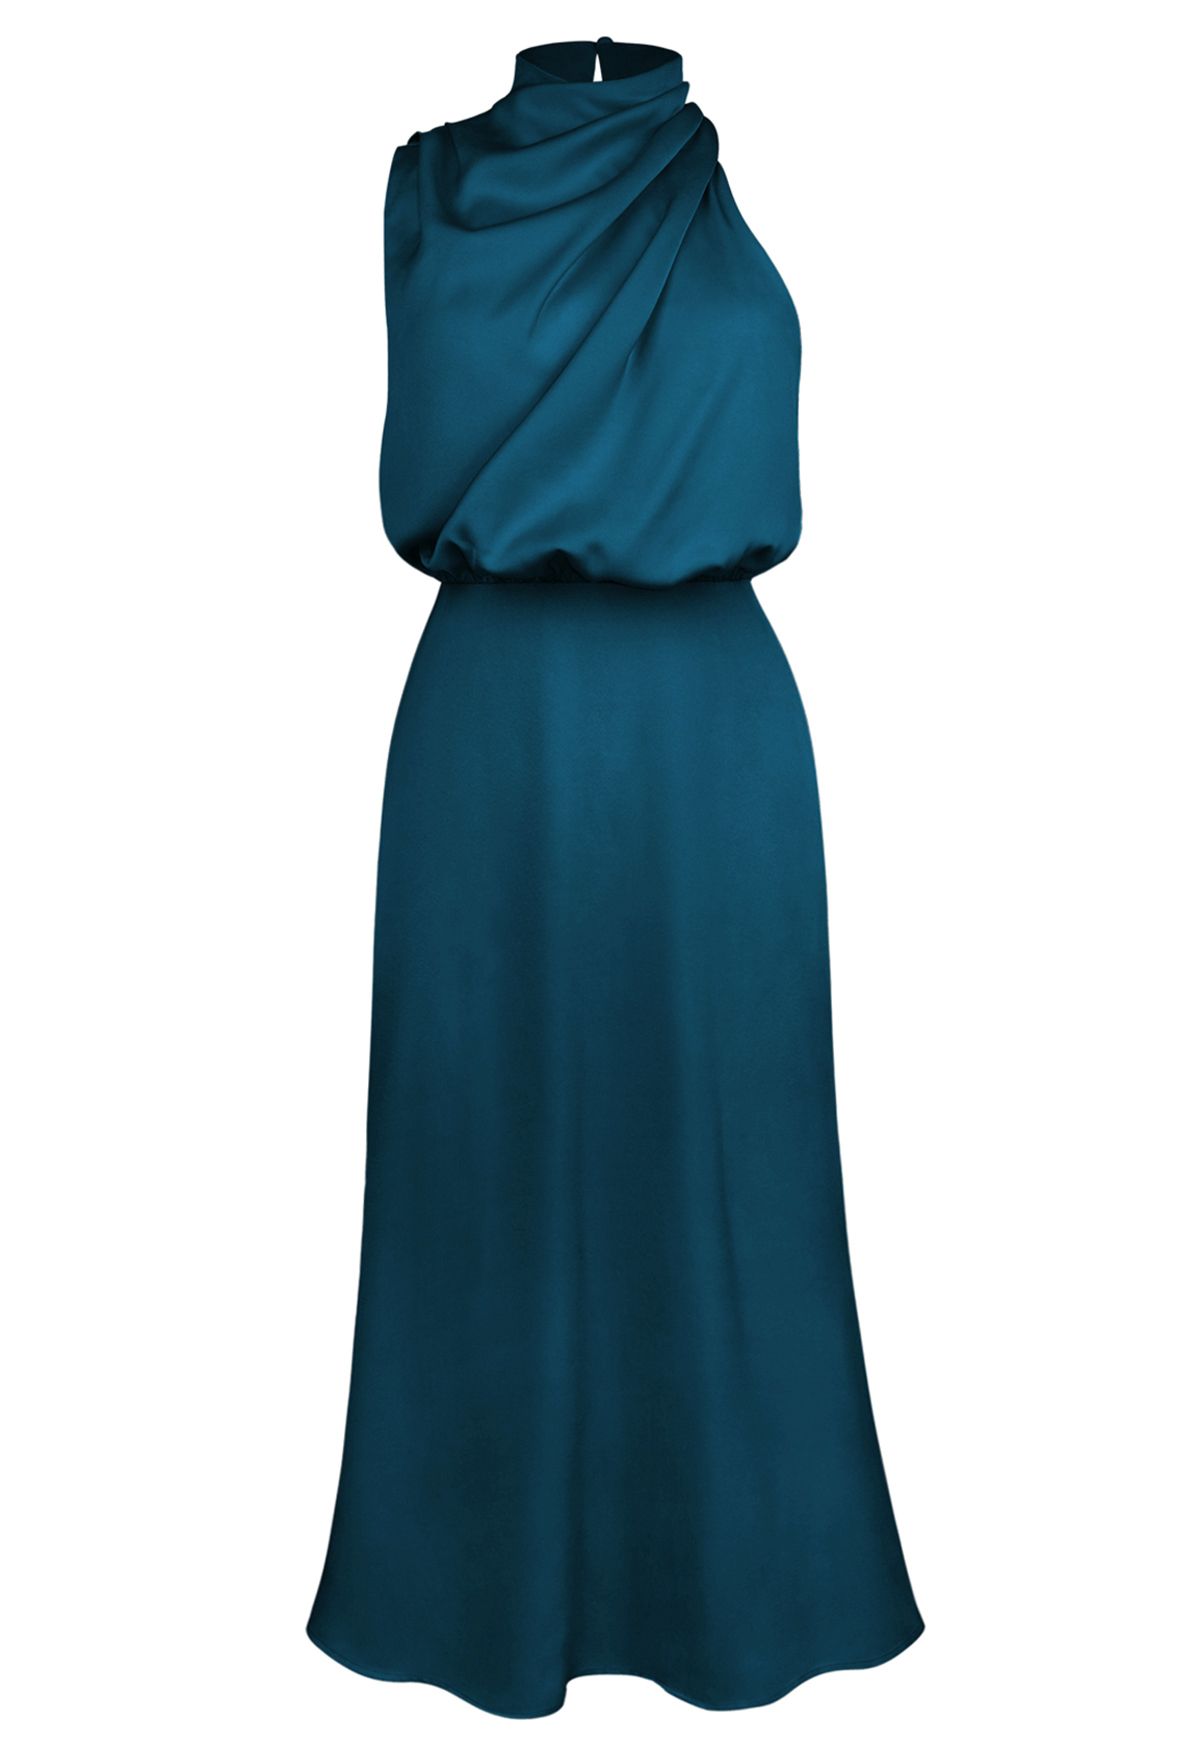 Asymmetric Ruched Neckline Sleeveless Dress in Teal